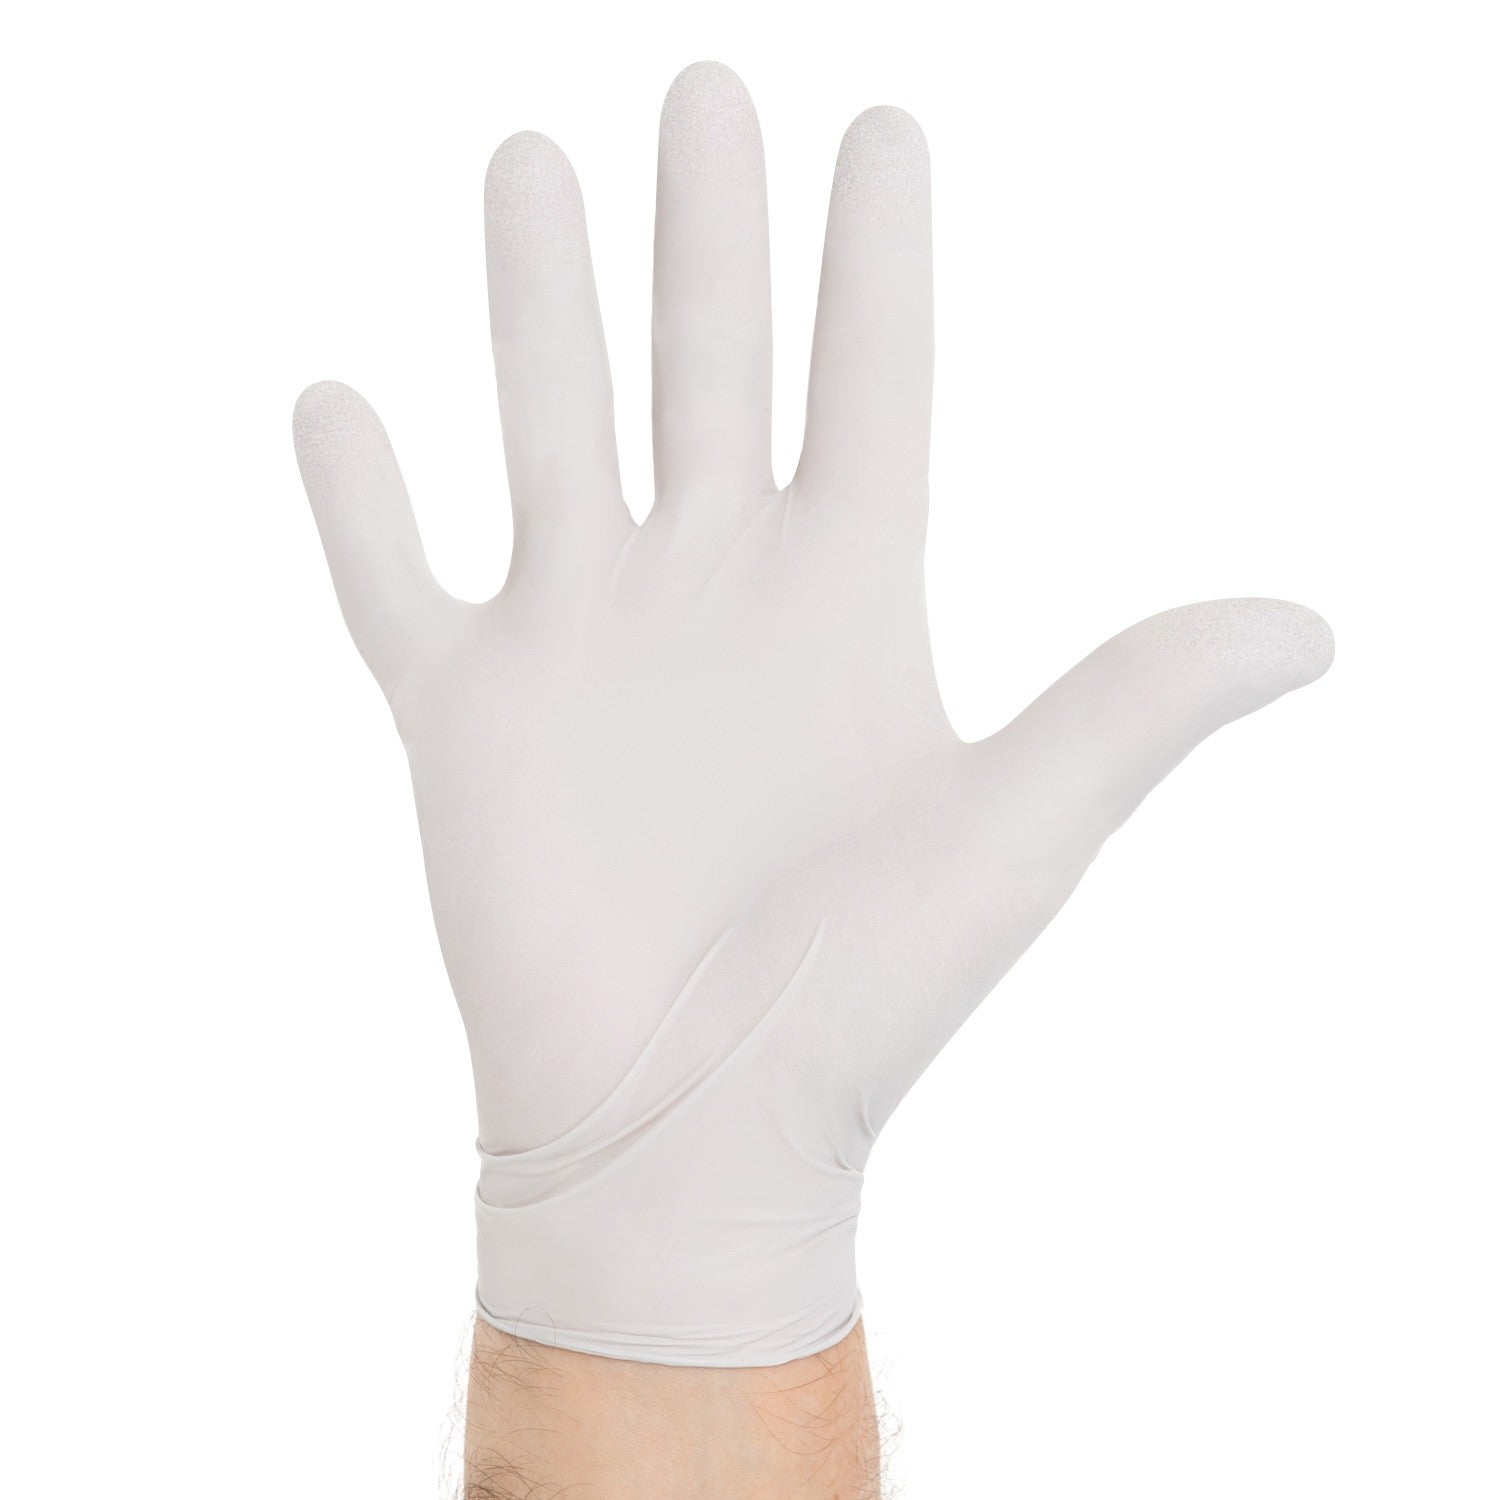 Halyard Sterling Nitrile Exam Gloves Protection & Tactile Sensitivity- Small, Powder-Free, 200/Box